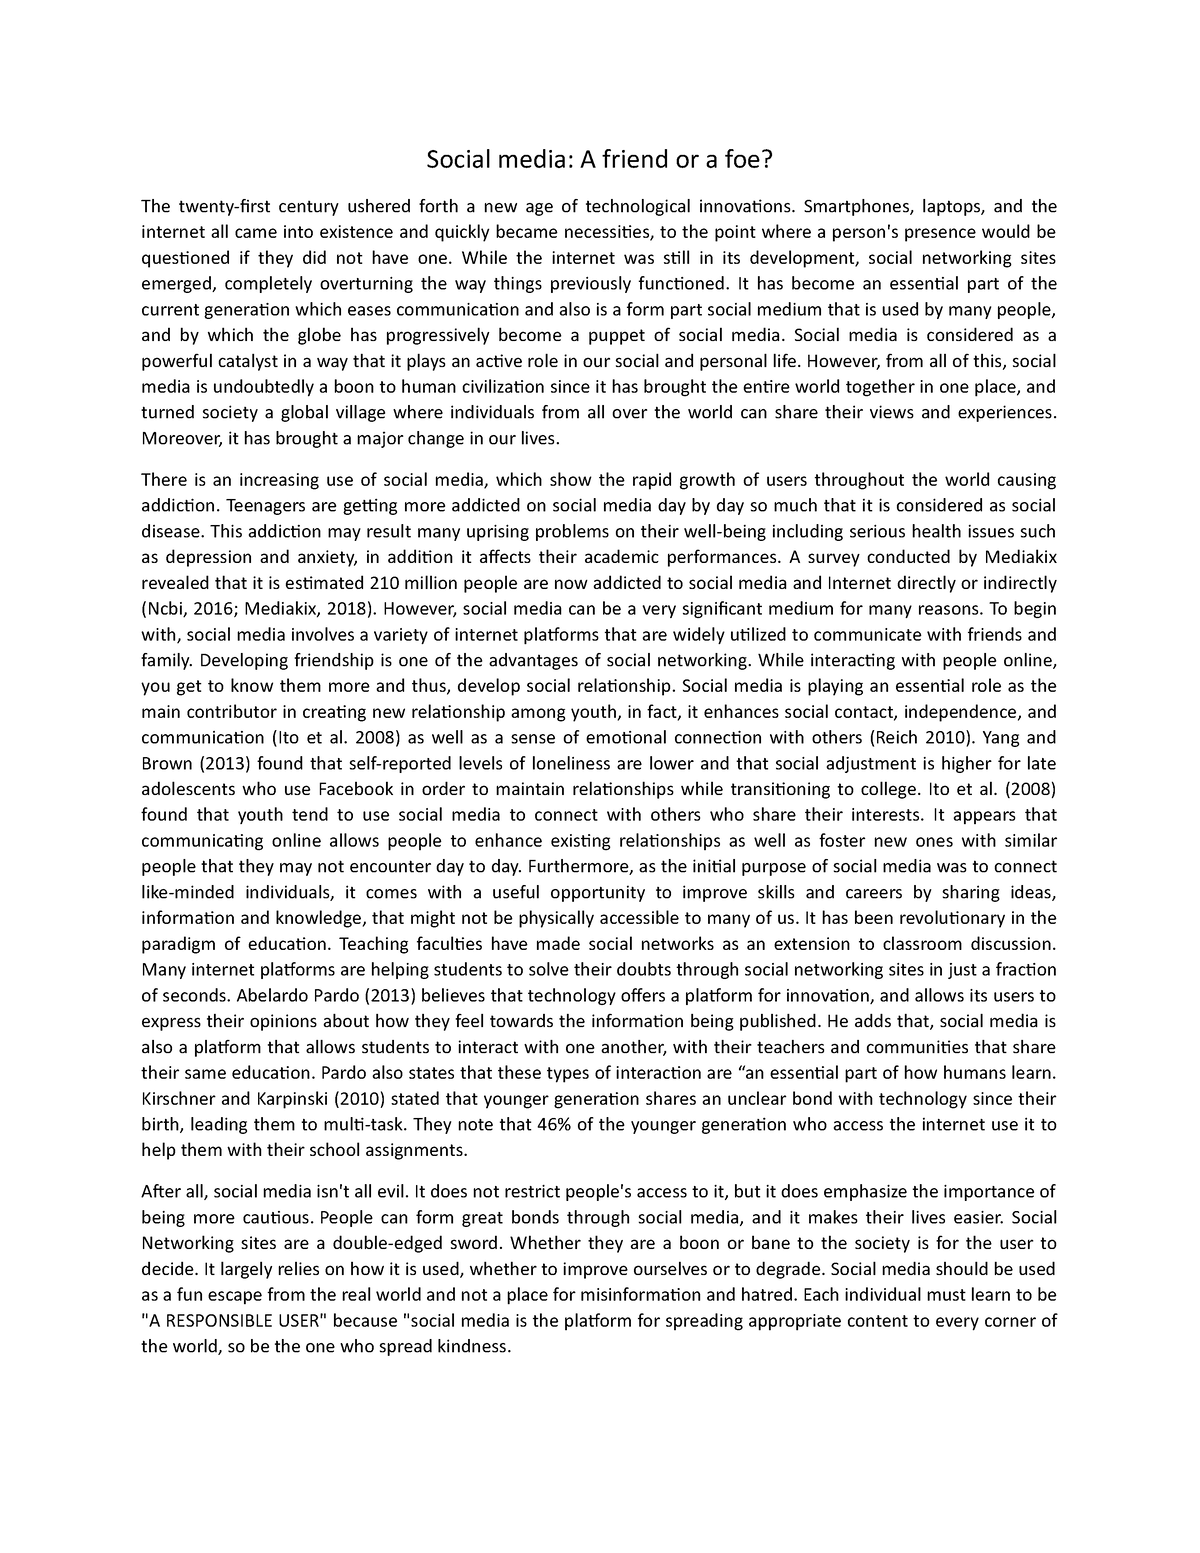 example of position paper about social media